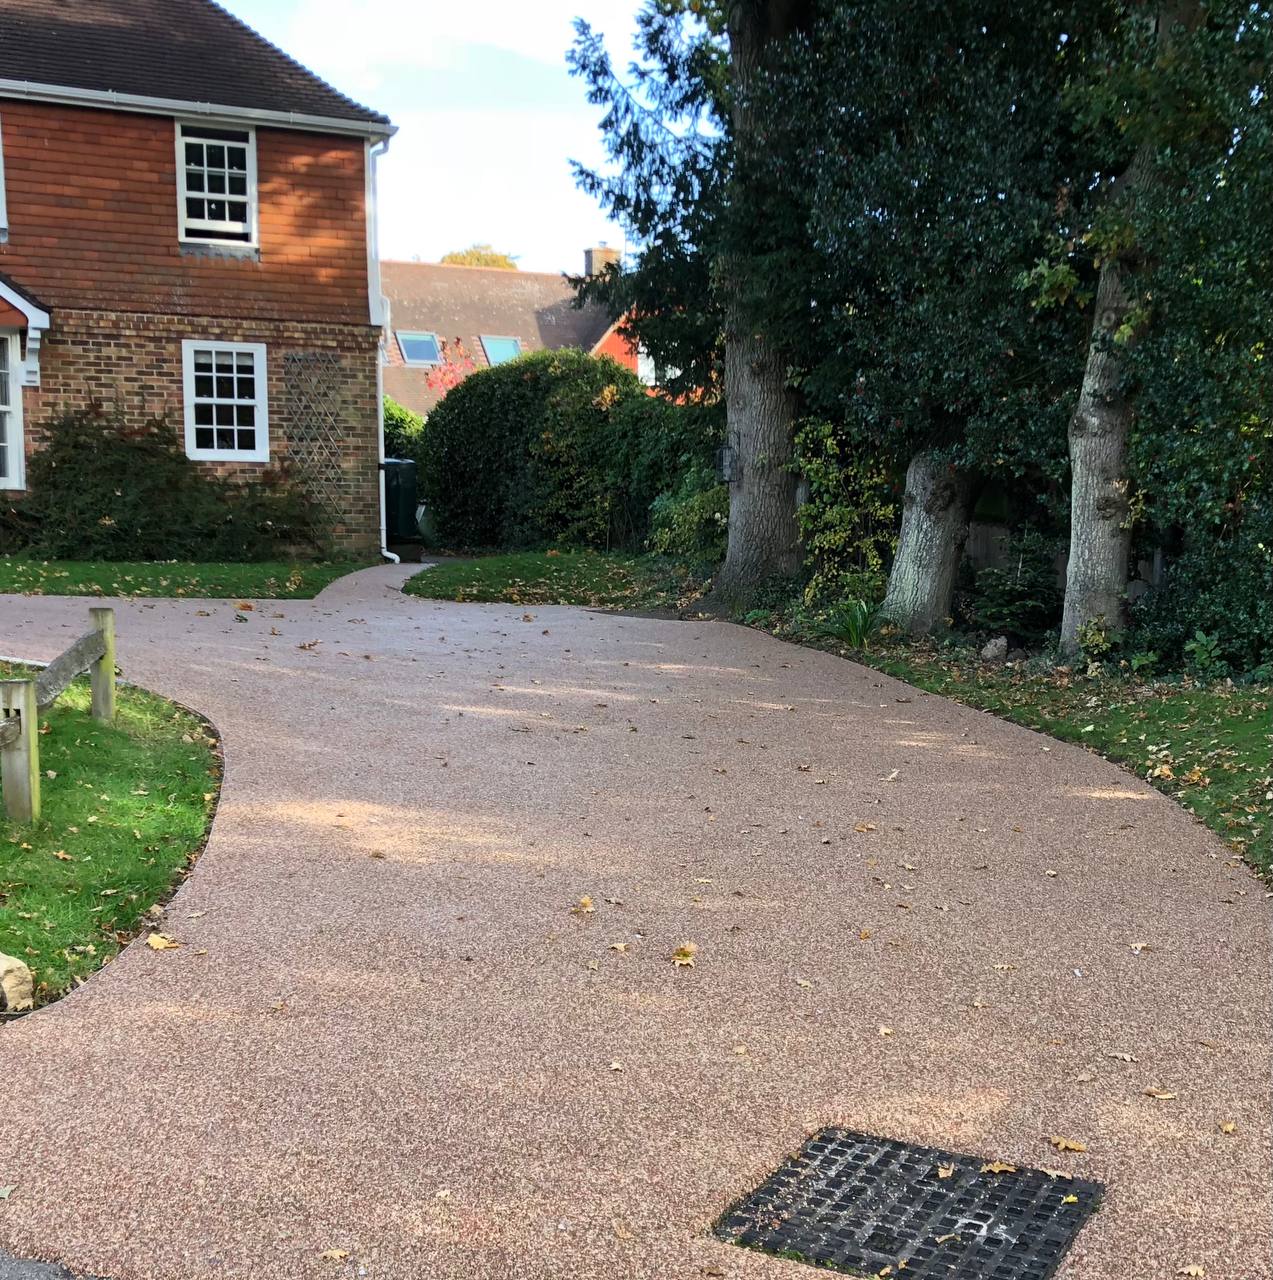 This is a photo of a Resin bound driveway carried out in a district of Oldham. All works done by Oldham Resin Driveways